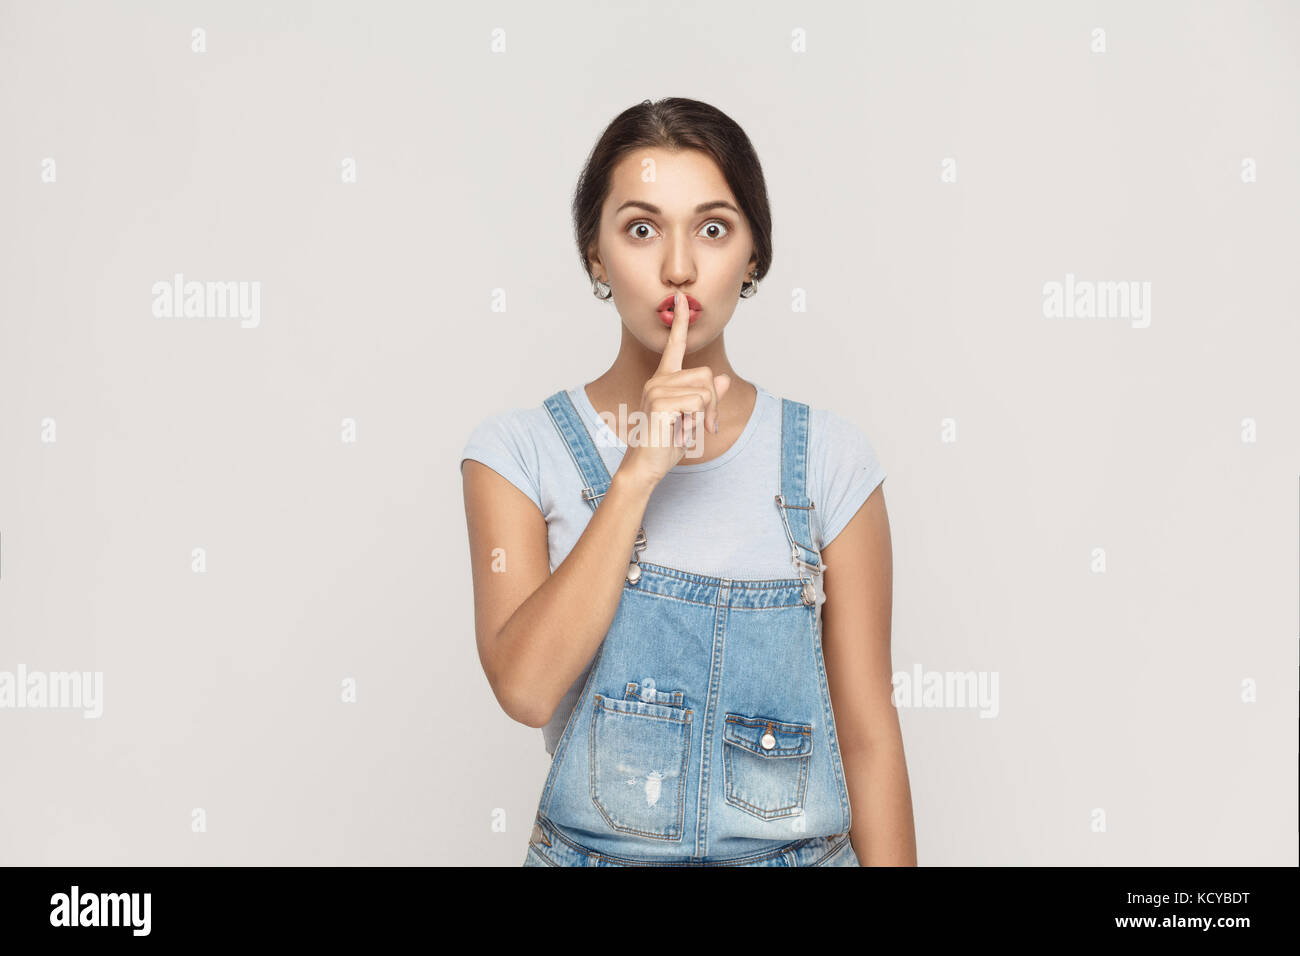 Shh sign. Beautiful indian woman looking at camera with silent sign. Studio shot, on gray background. Stock Photo